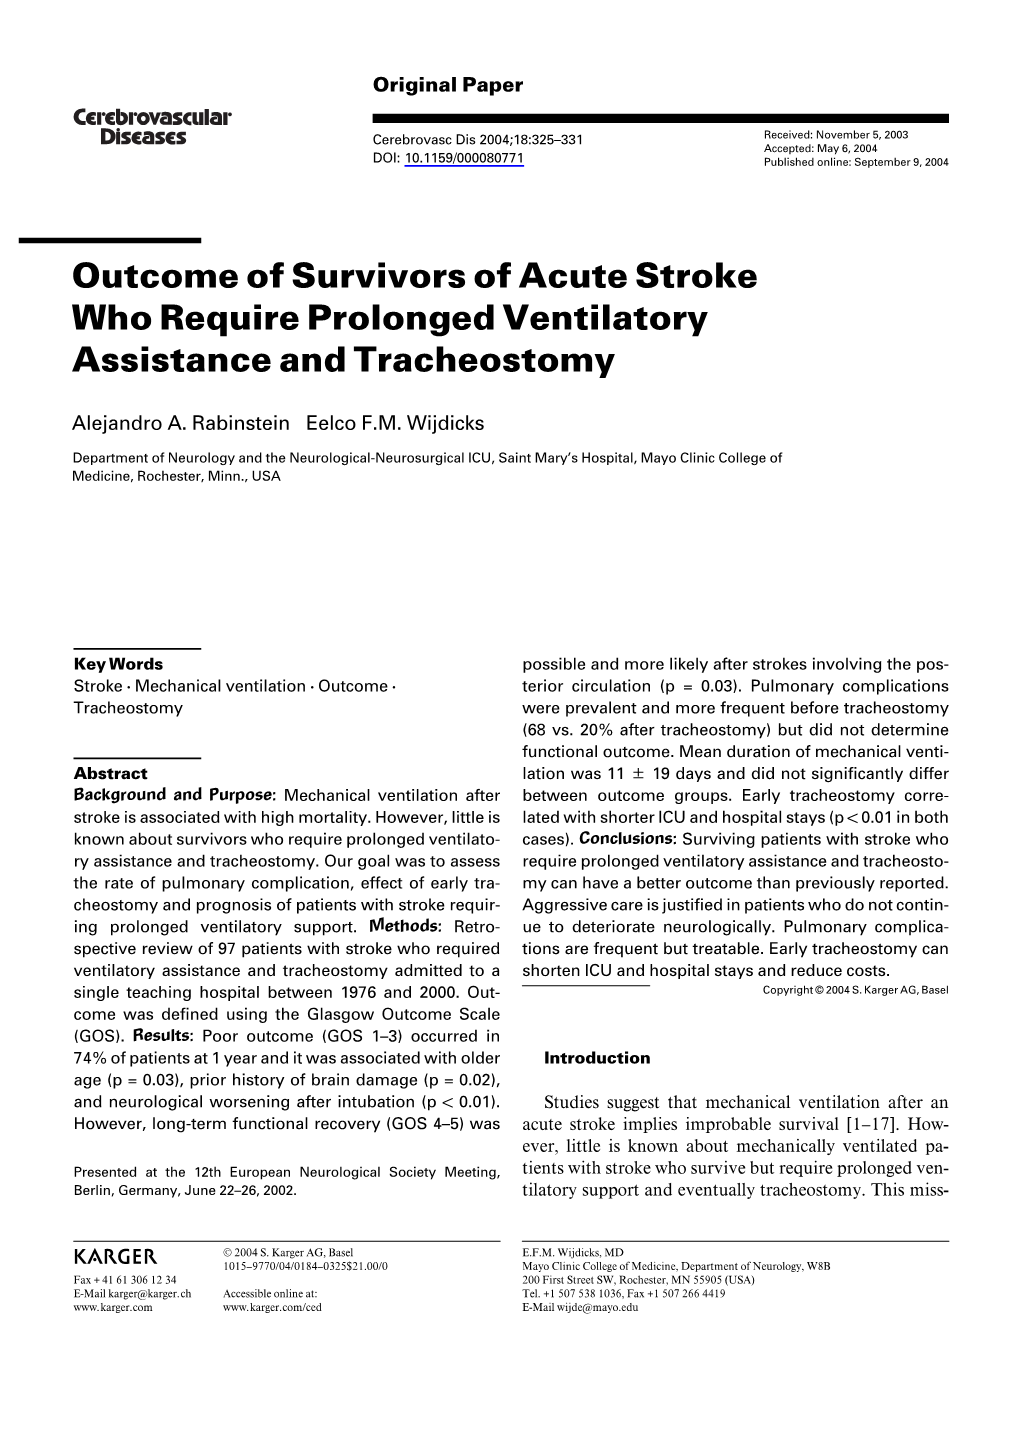 Outcome of Survivors of Acute Stroke Who Require Prolonged Ventilatory Assistance and Tracheostomy